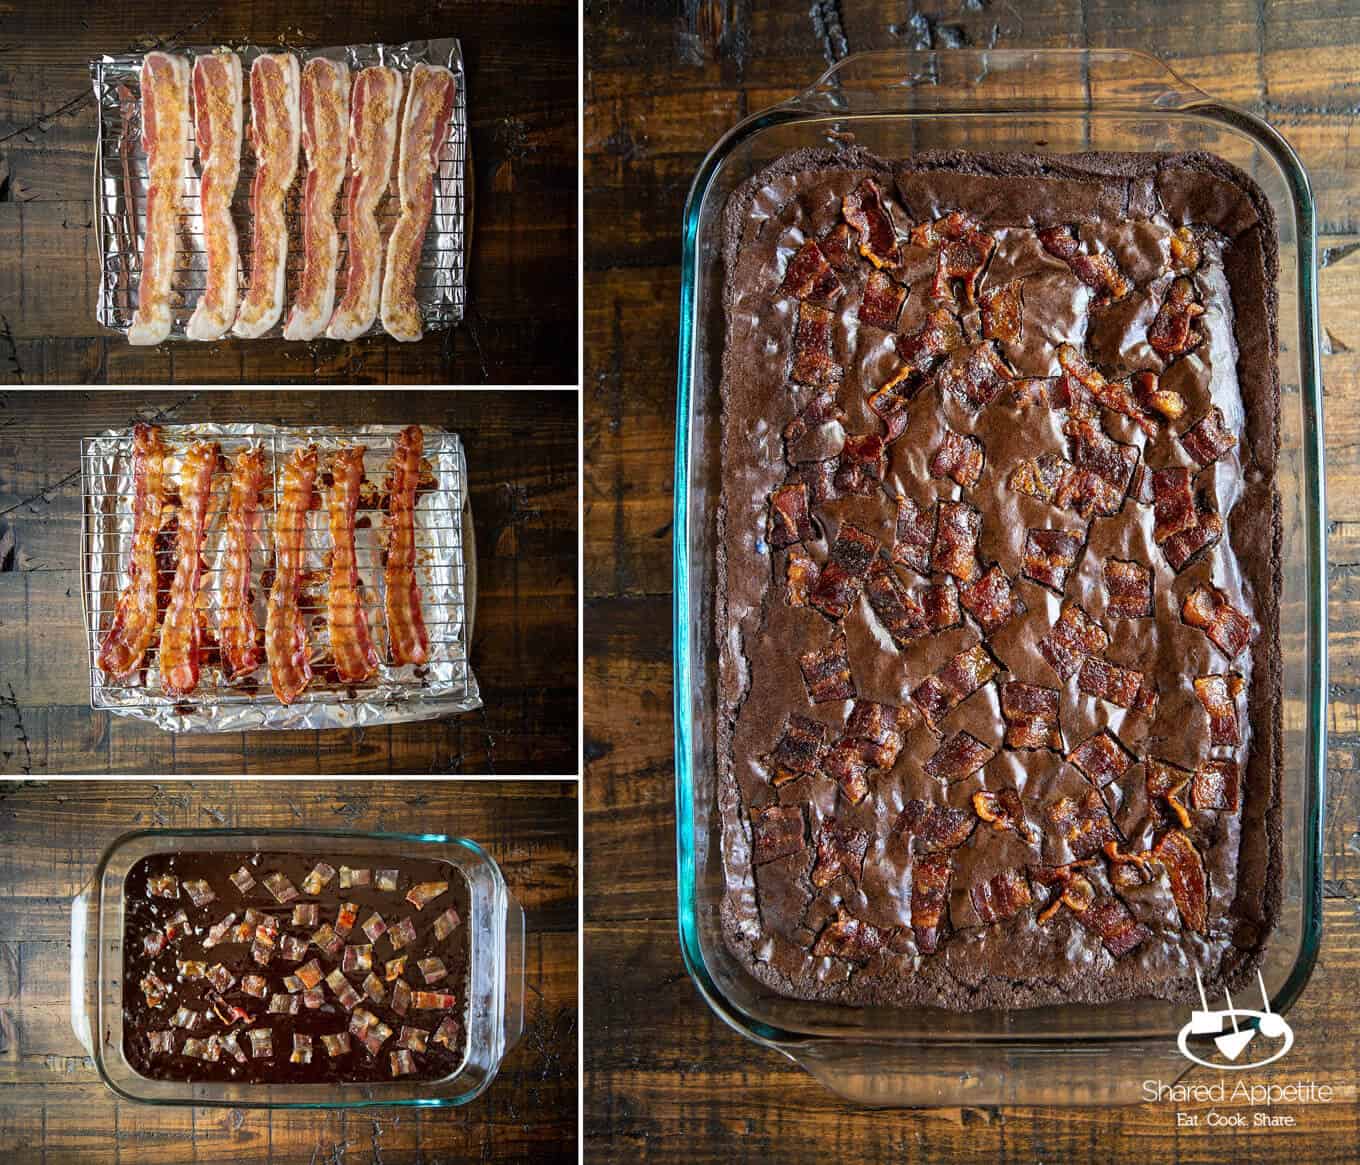 making brownies and candied bacon for Candied Bacon Brownie Sundaes with Whiskey Caramel Sauce | sharedappetite.com